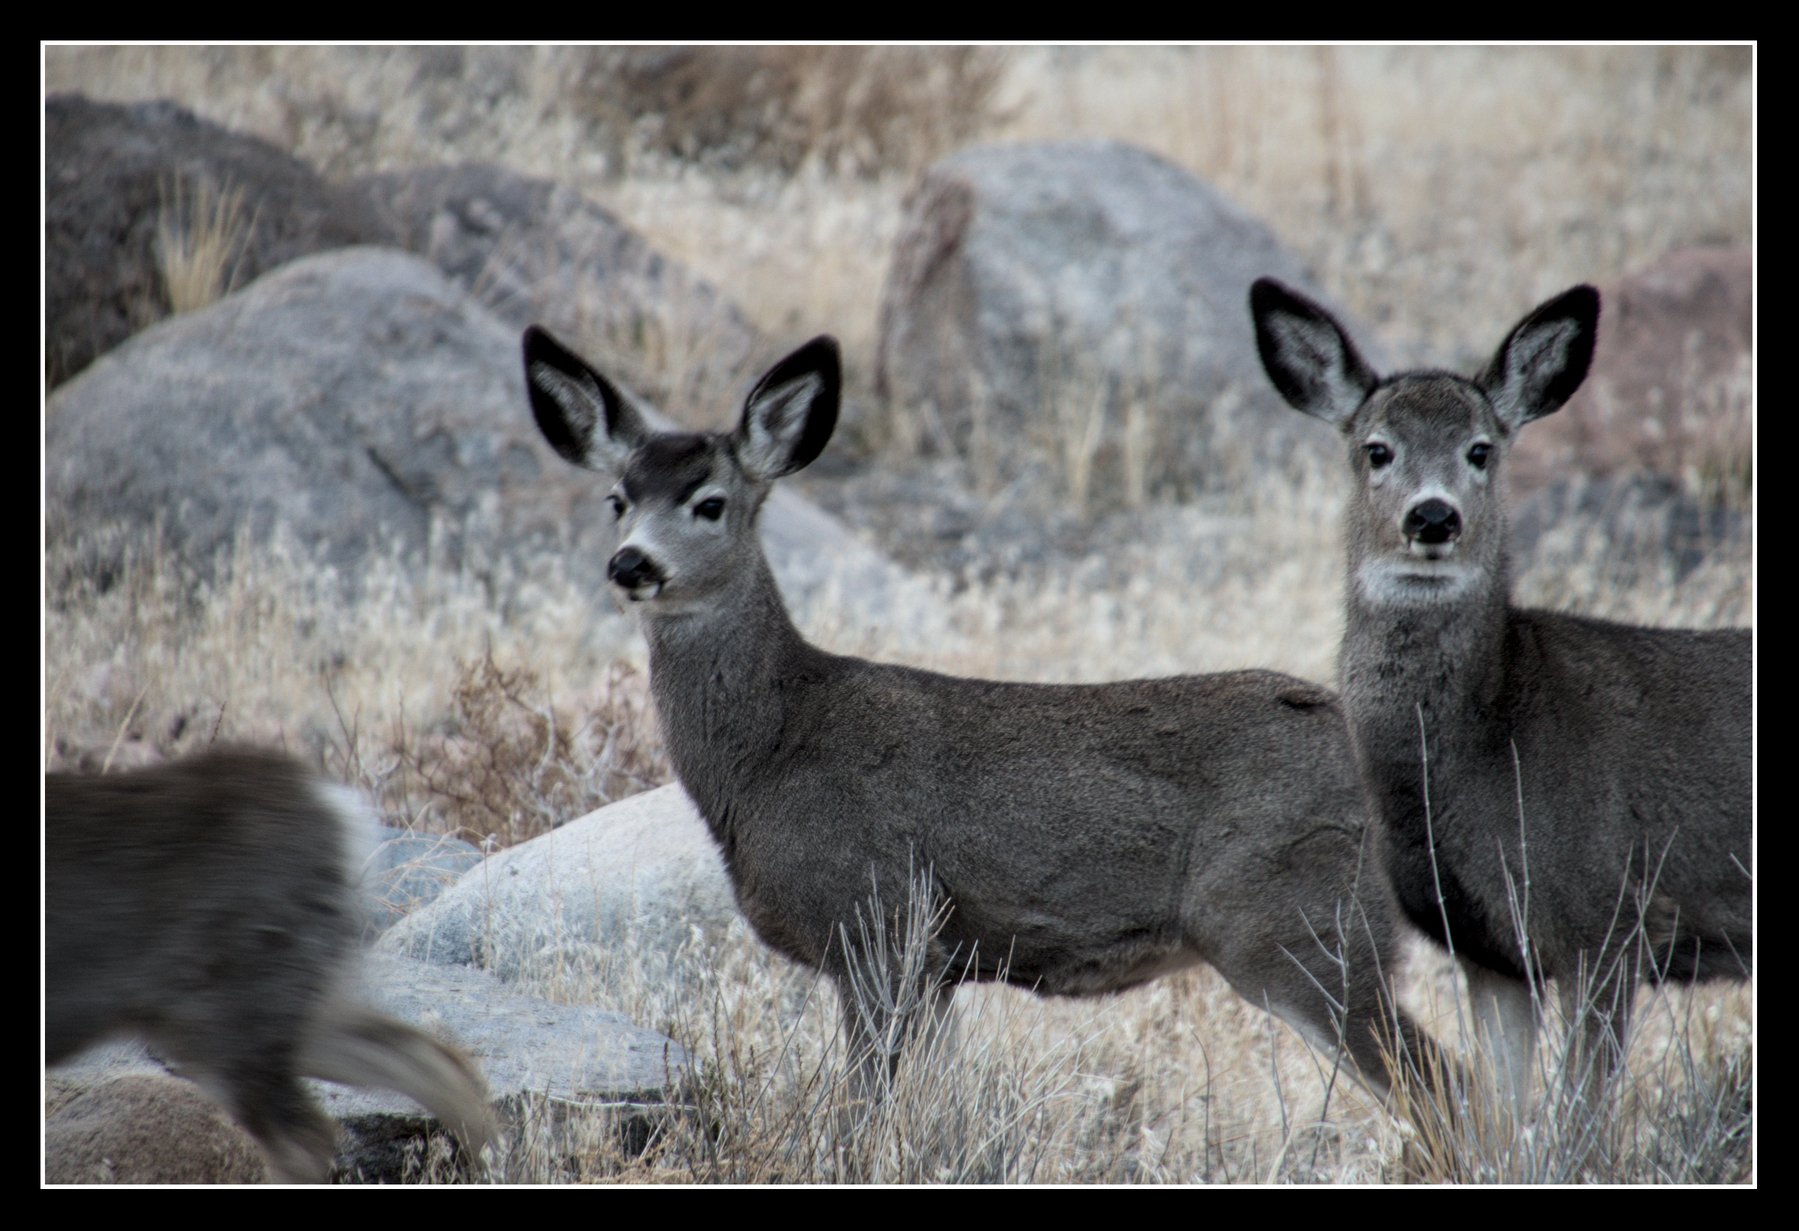 Two California Mule Deer pause to look at the camera.